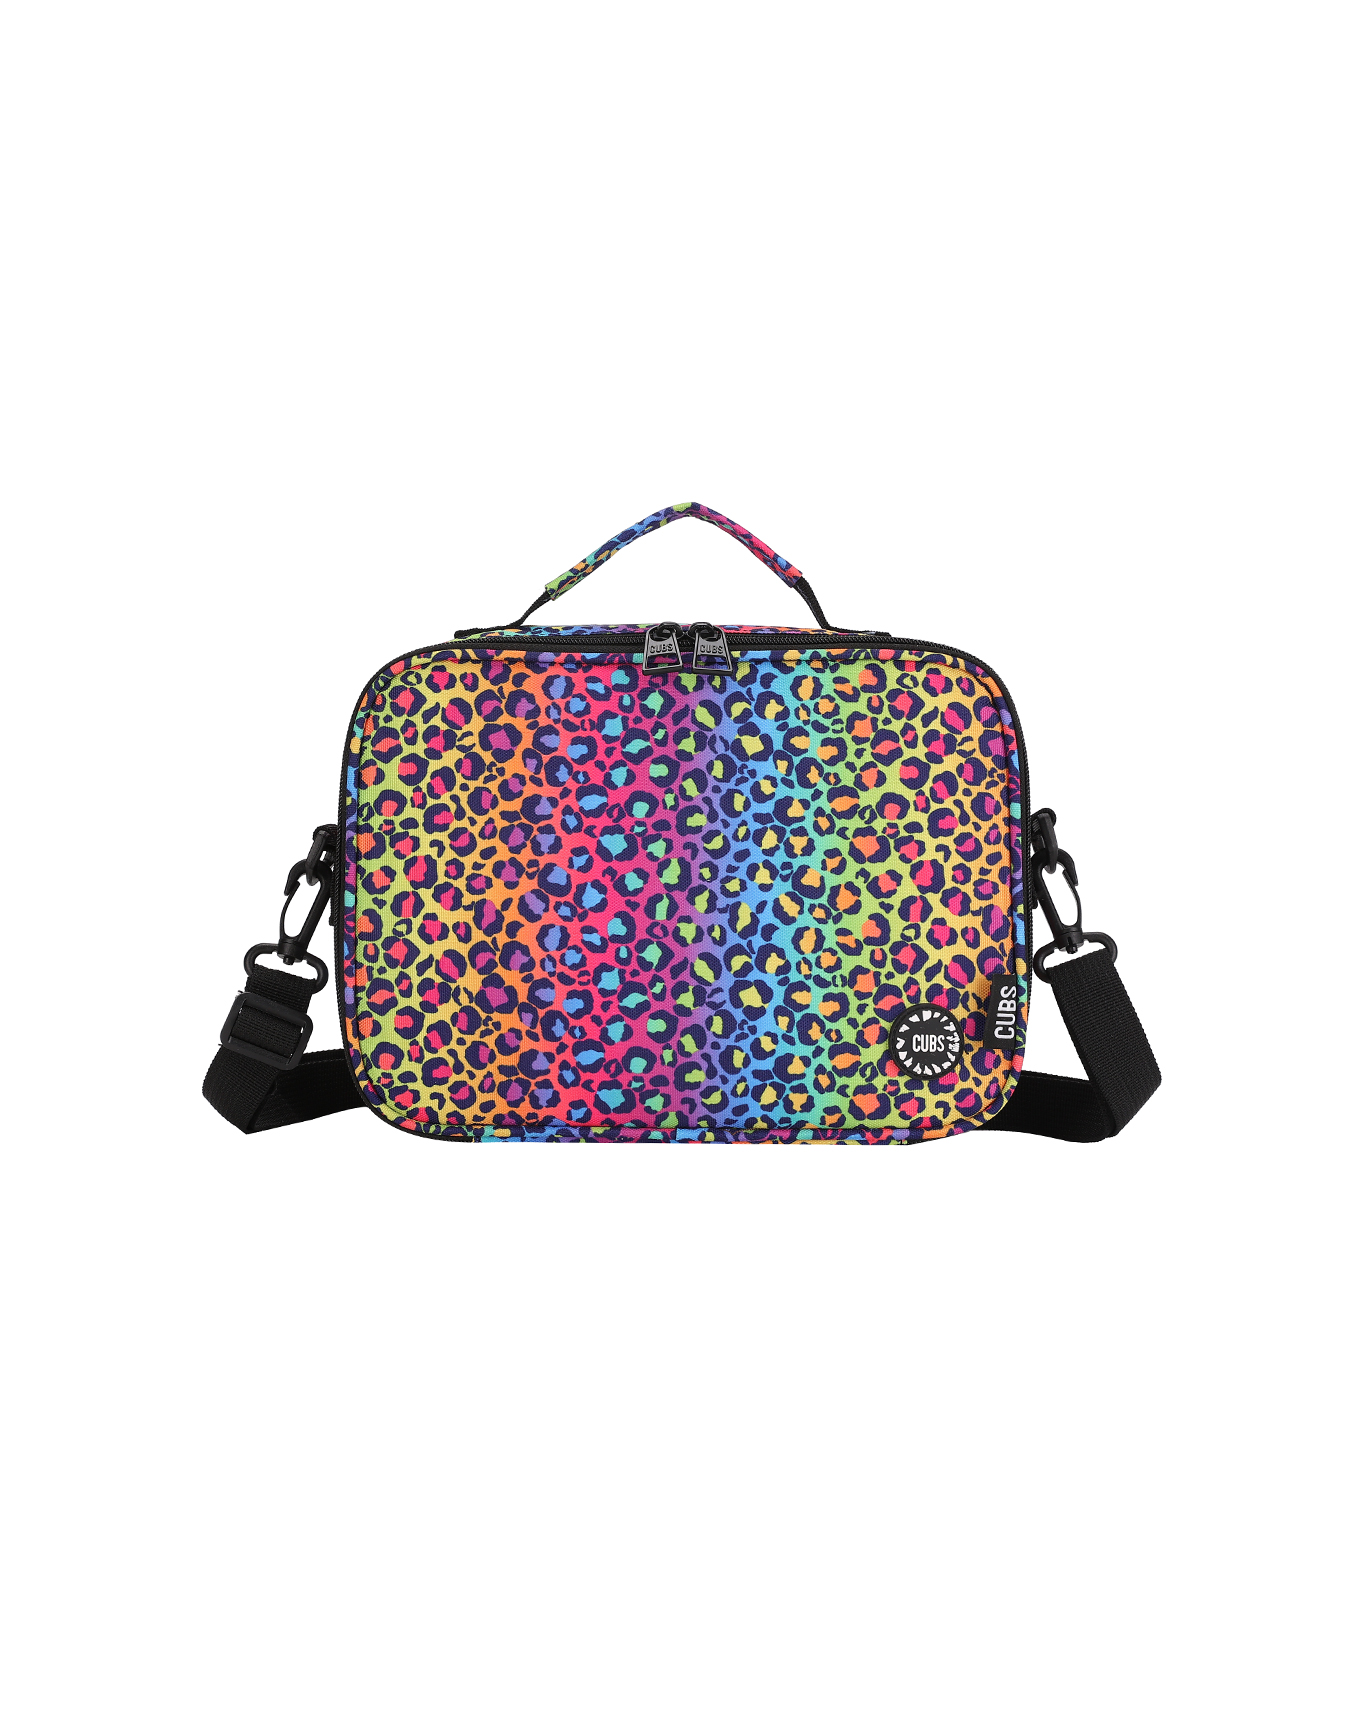 Rainbow Leopard Classic Lunch Bag With Shoulder Strap